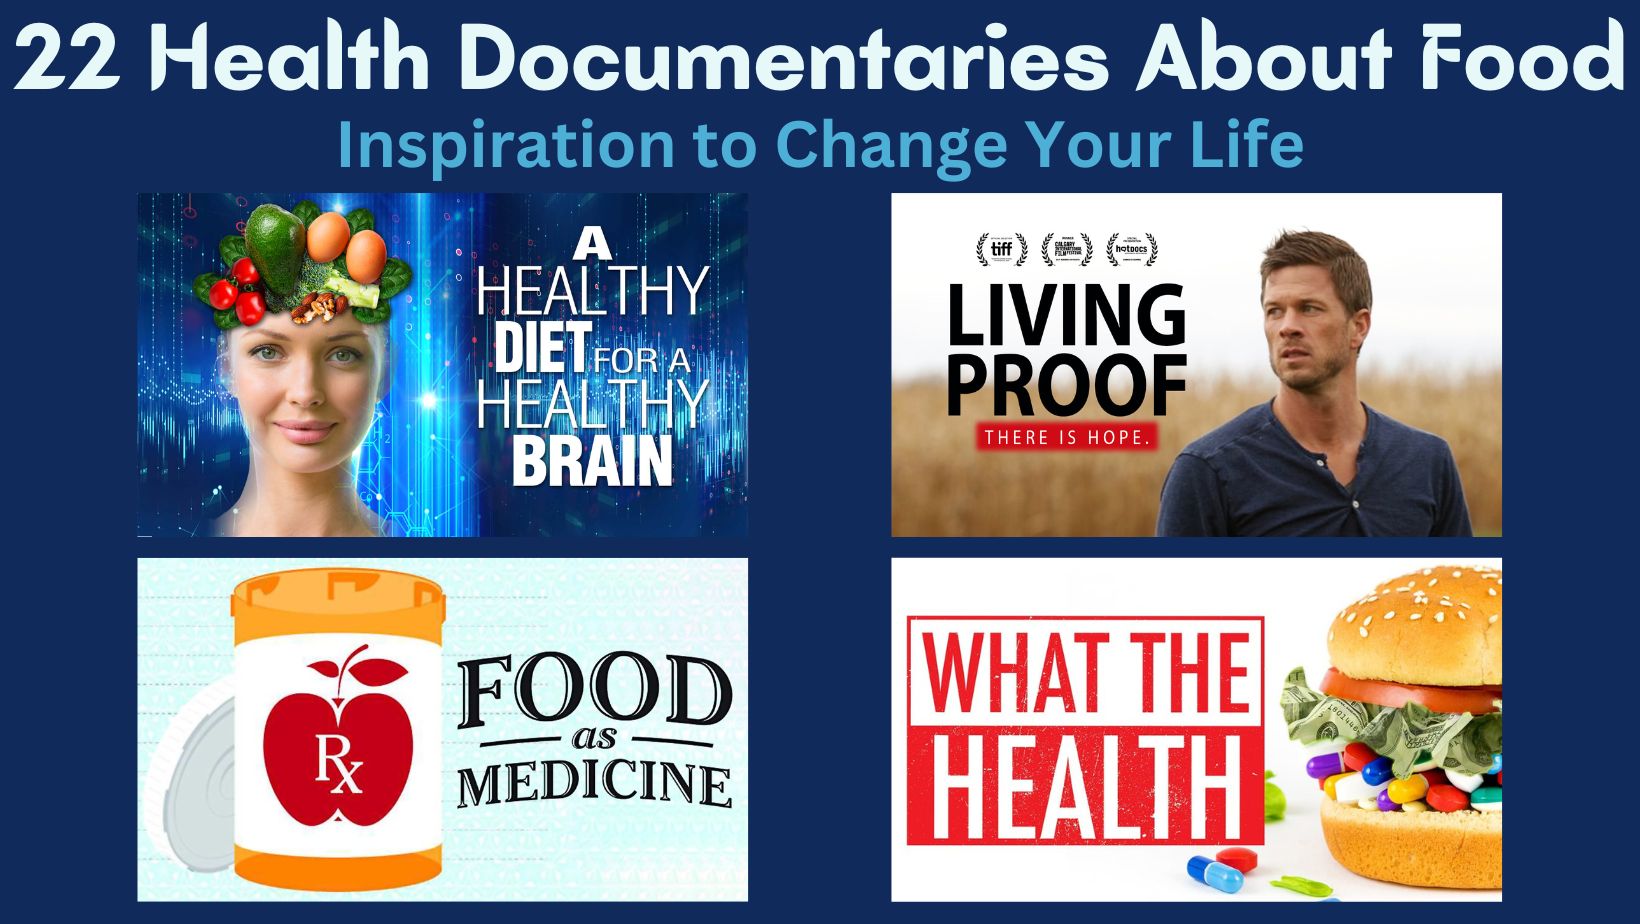 22 Best Health Documentaries About Food: Inspiration to Change Your Life